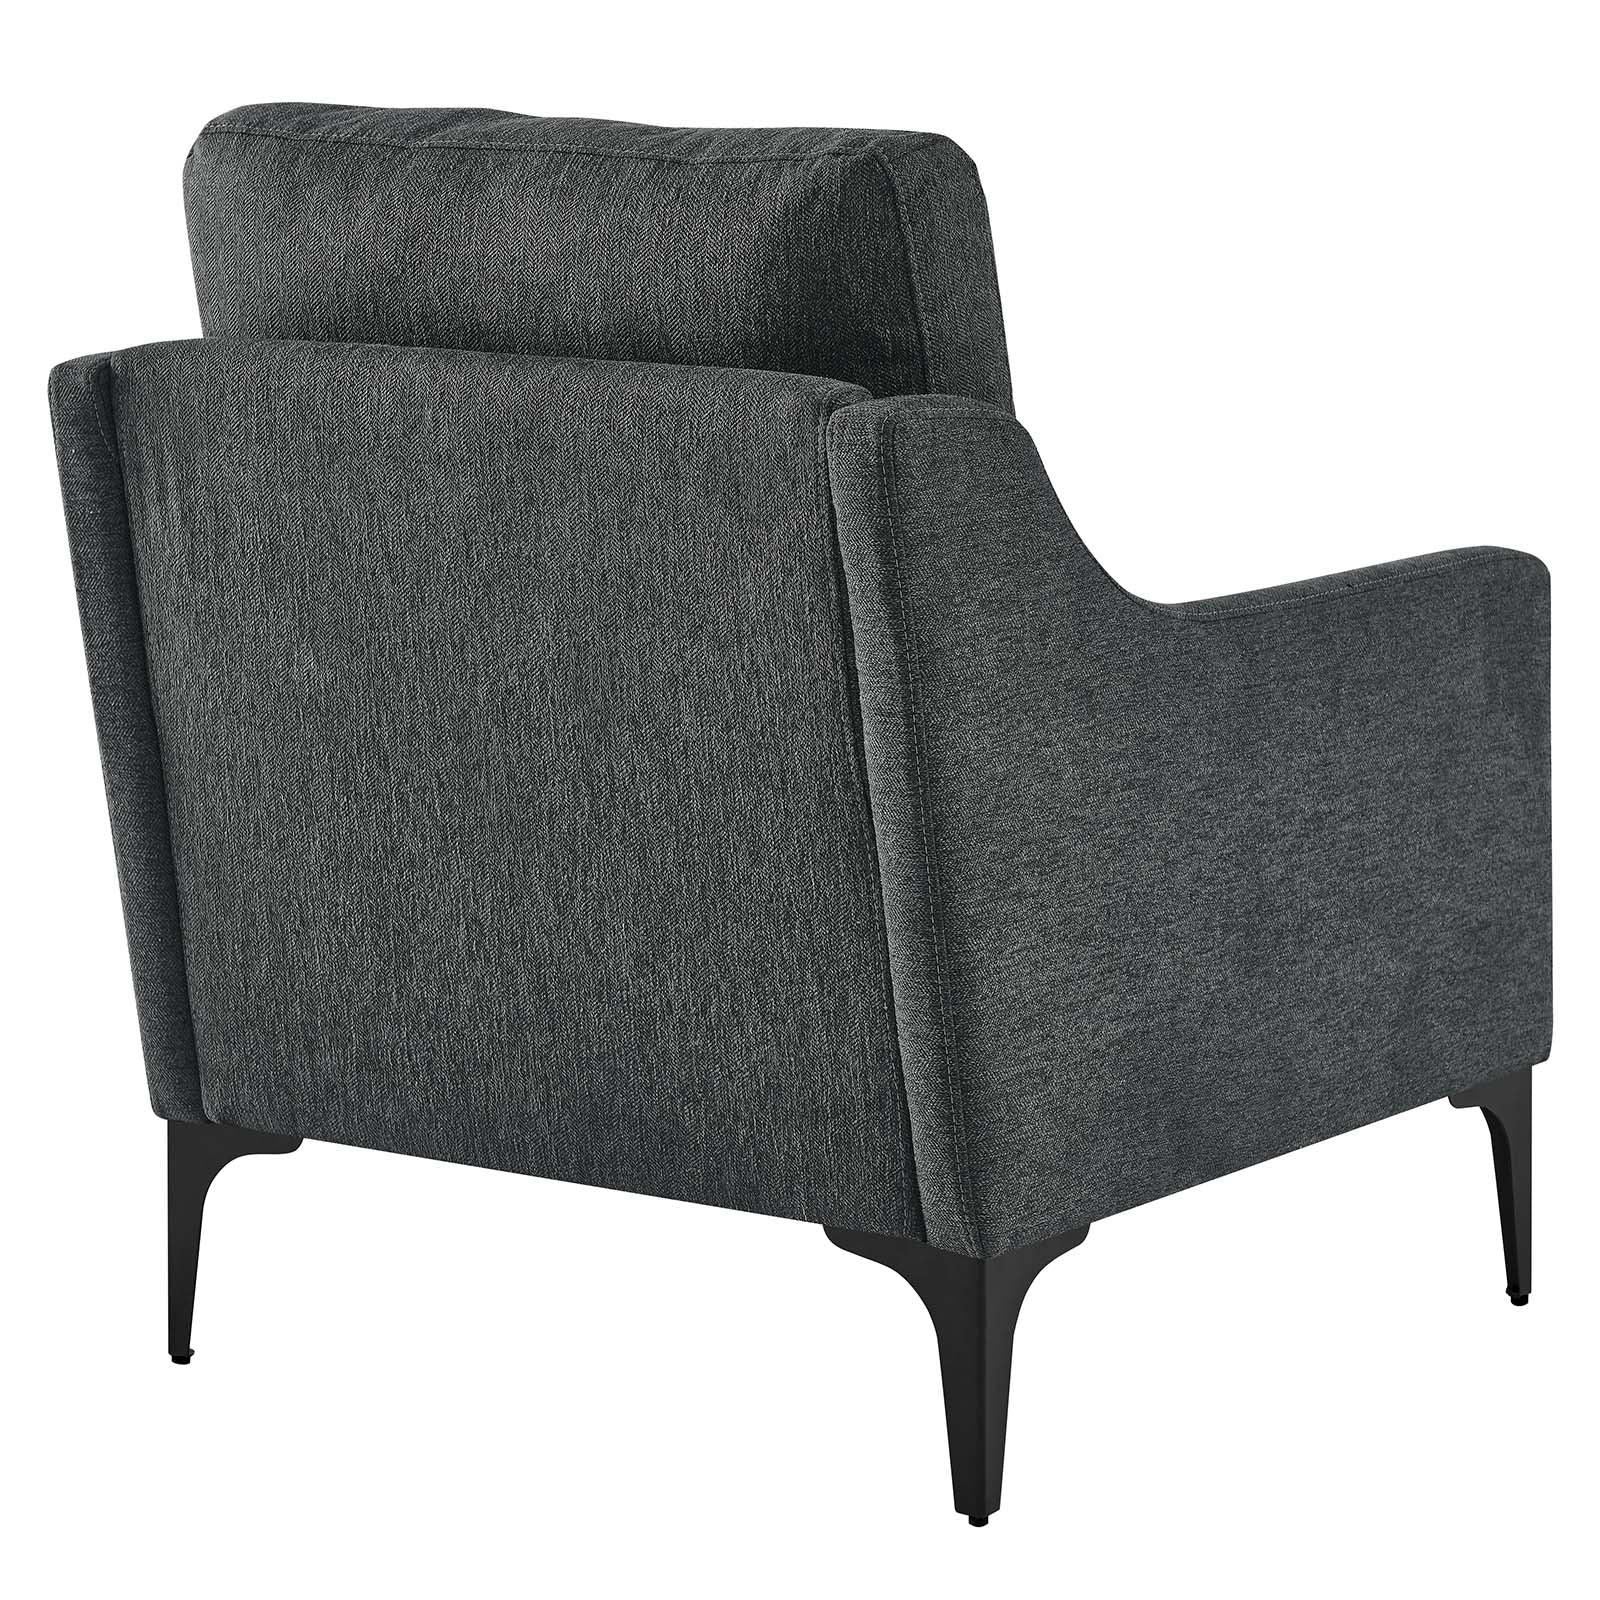 Corland Upholstered Fabric Armchair - East Shore Modern Home Furnishings